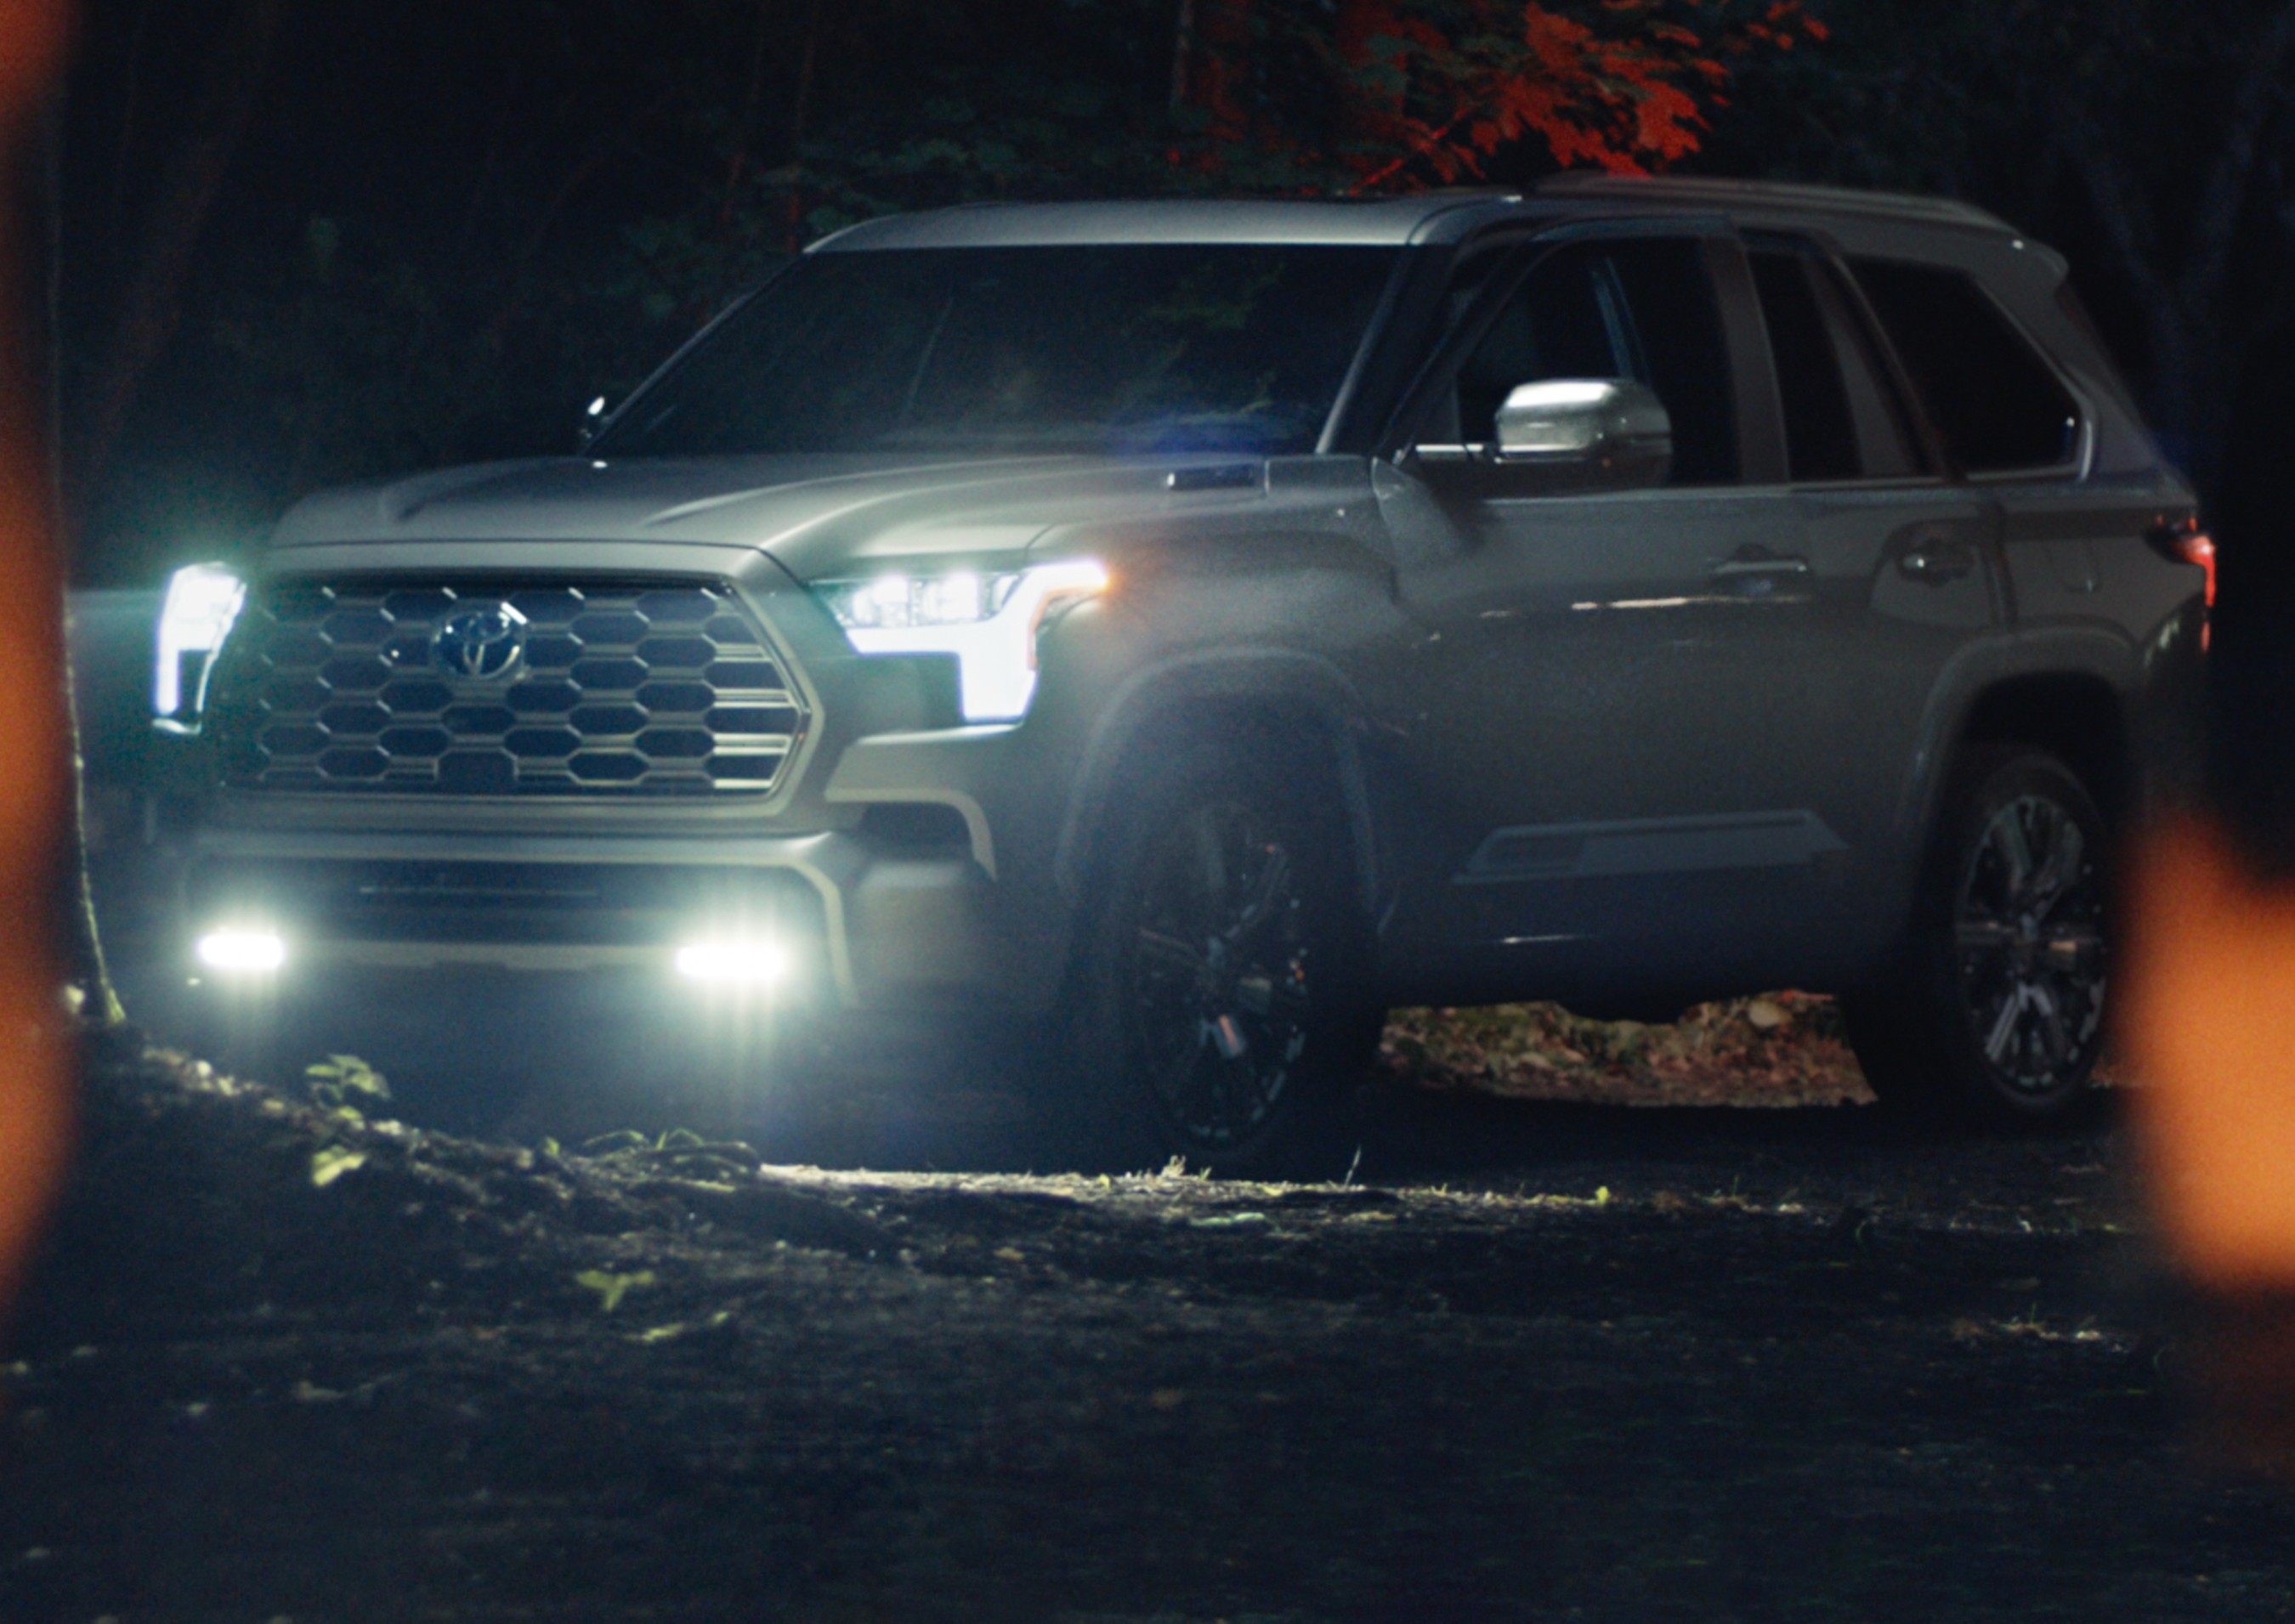 Saatchi & Saatchi developed the spot “Campfire Stories” for Toyota’s “Live Legendary” Sequoia campaign.